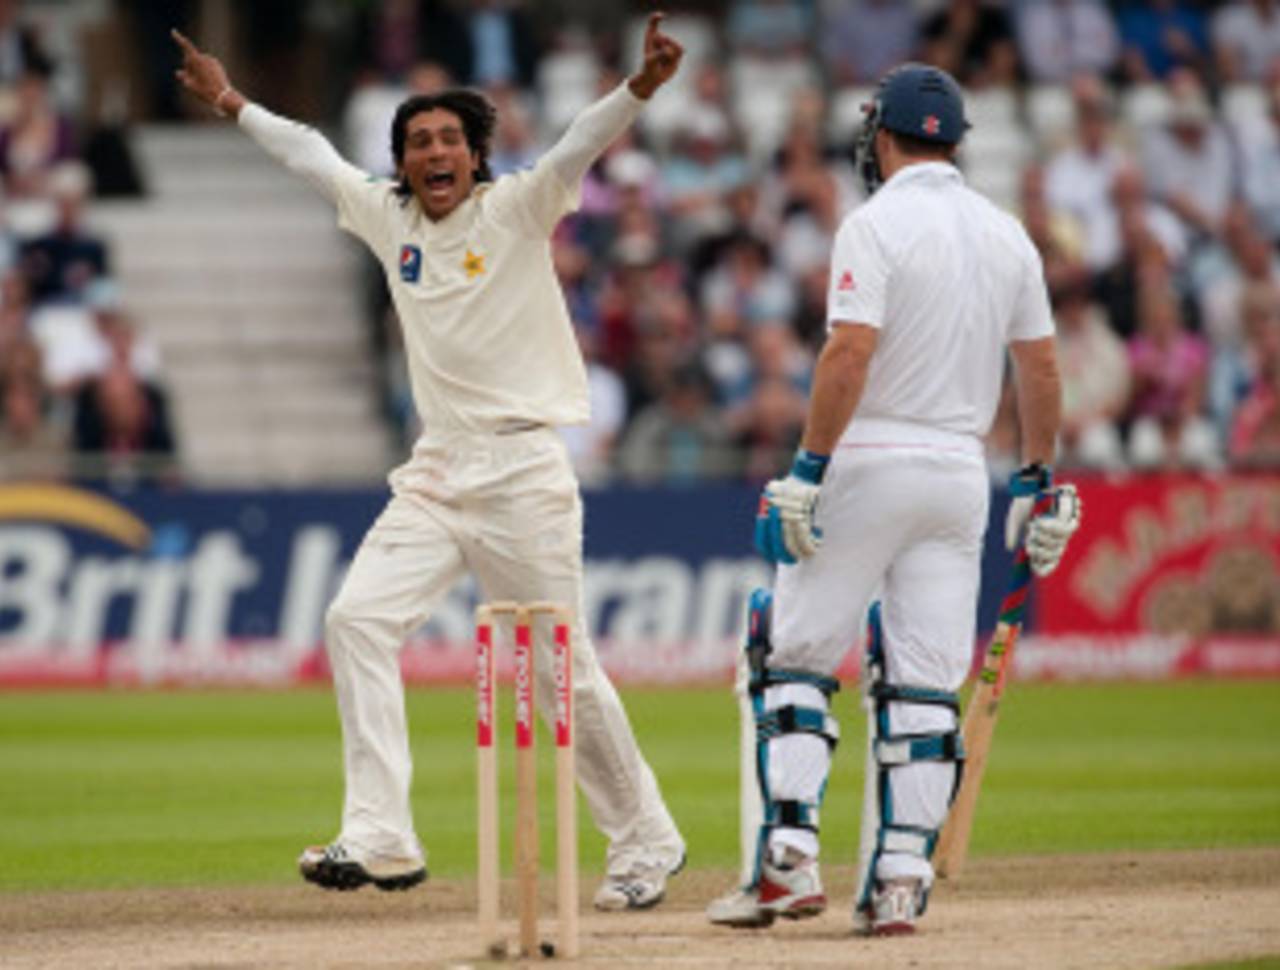 Mohammad Amir celebrates the dismissal of Andrew Strauss for a duck, England v Pakistan, 1st Test, Trent Bridge, 2nd day, July 31, 2010